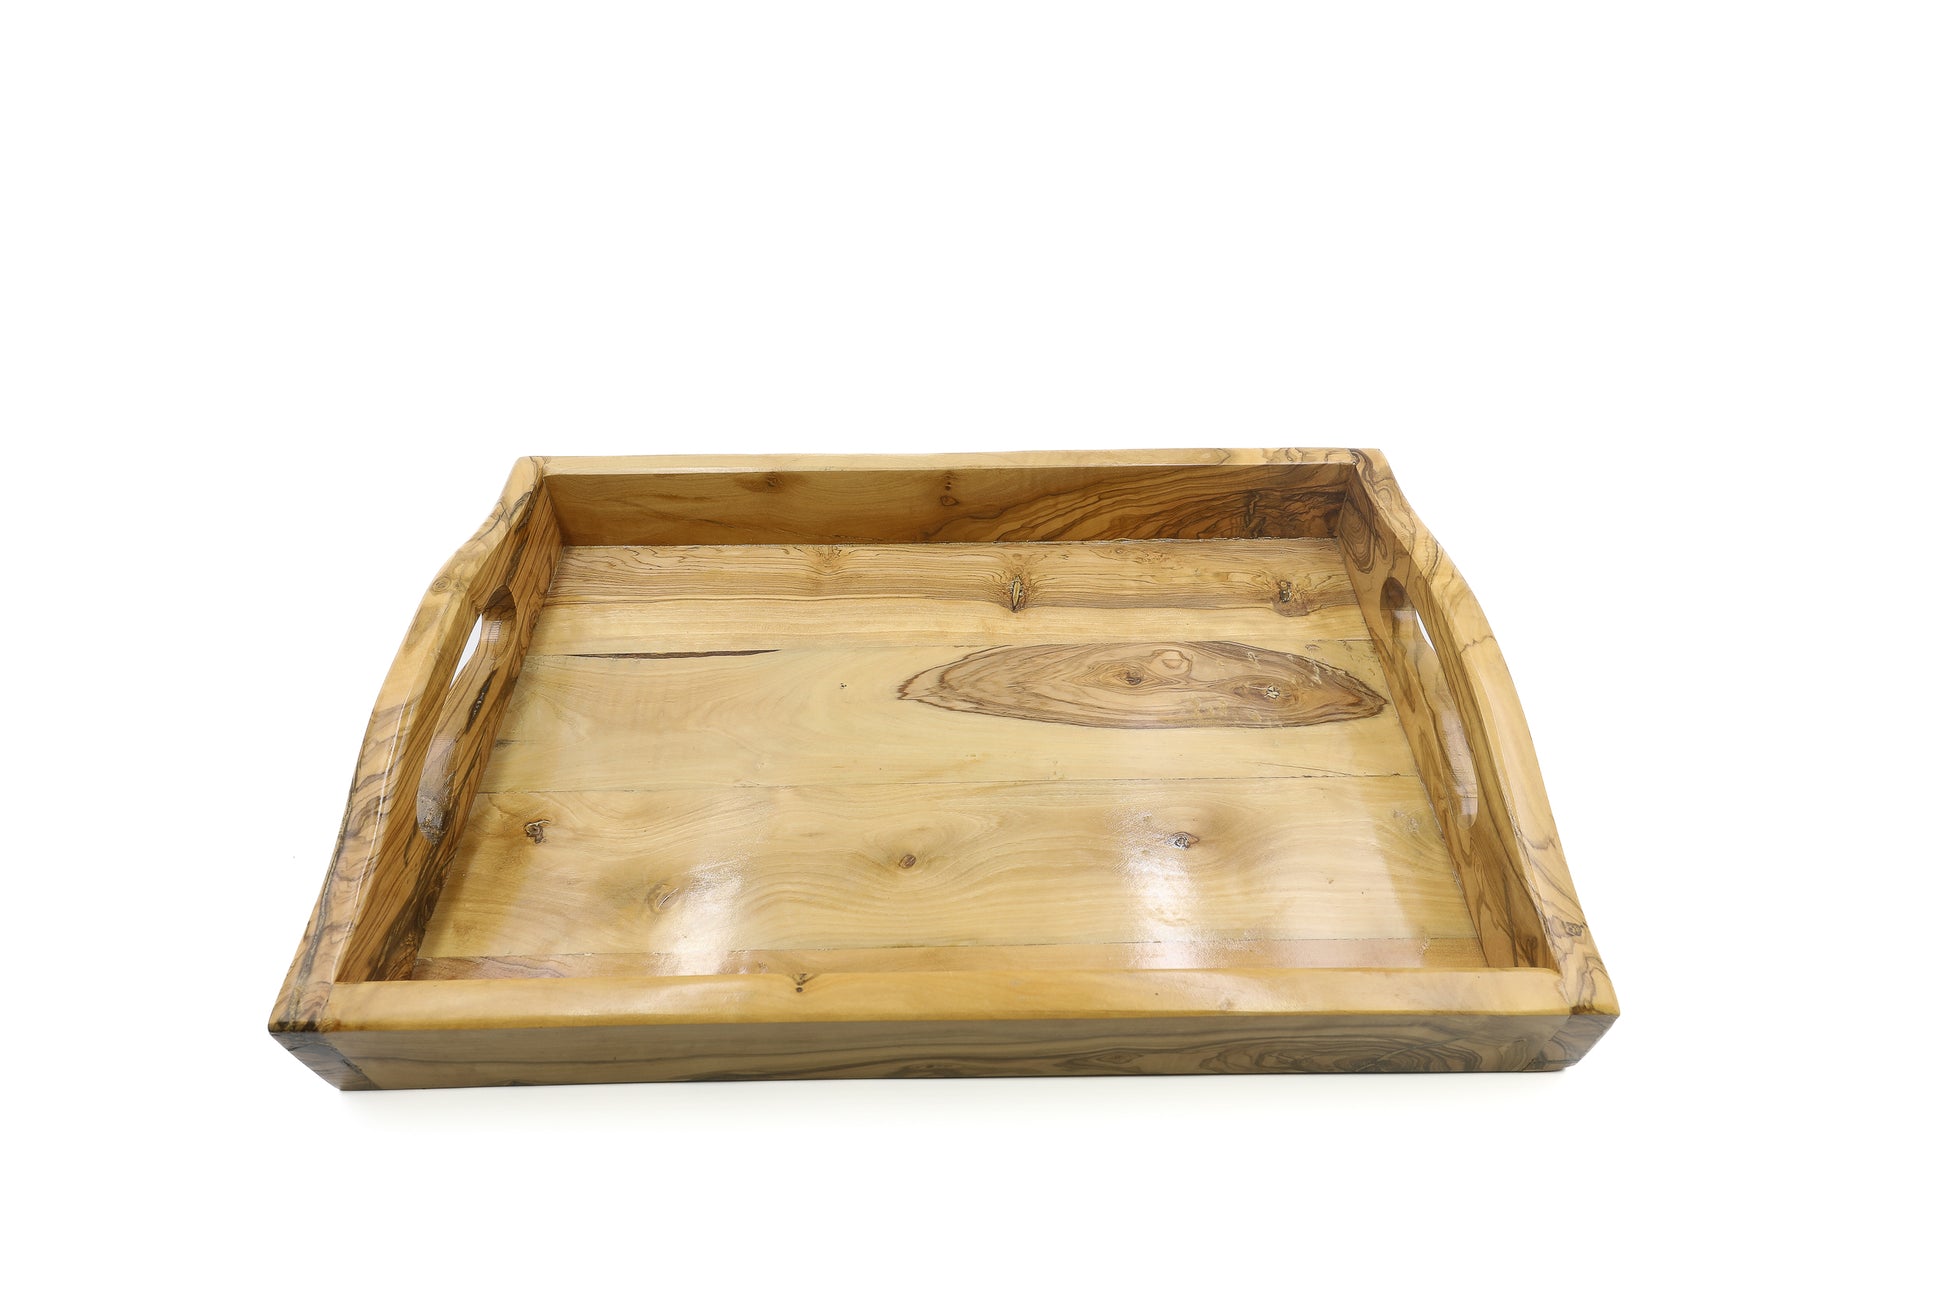 Olive wood serving tray with ergonomic handles for easy carrying